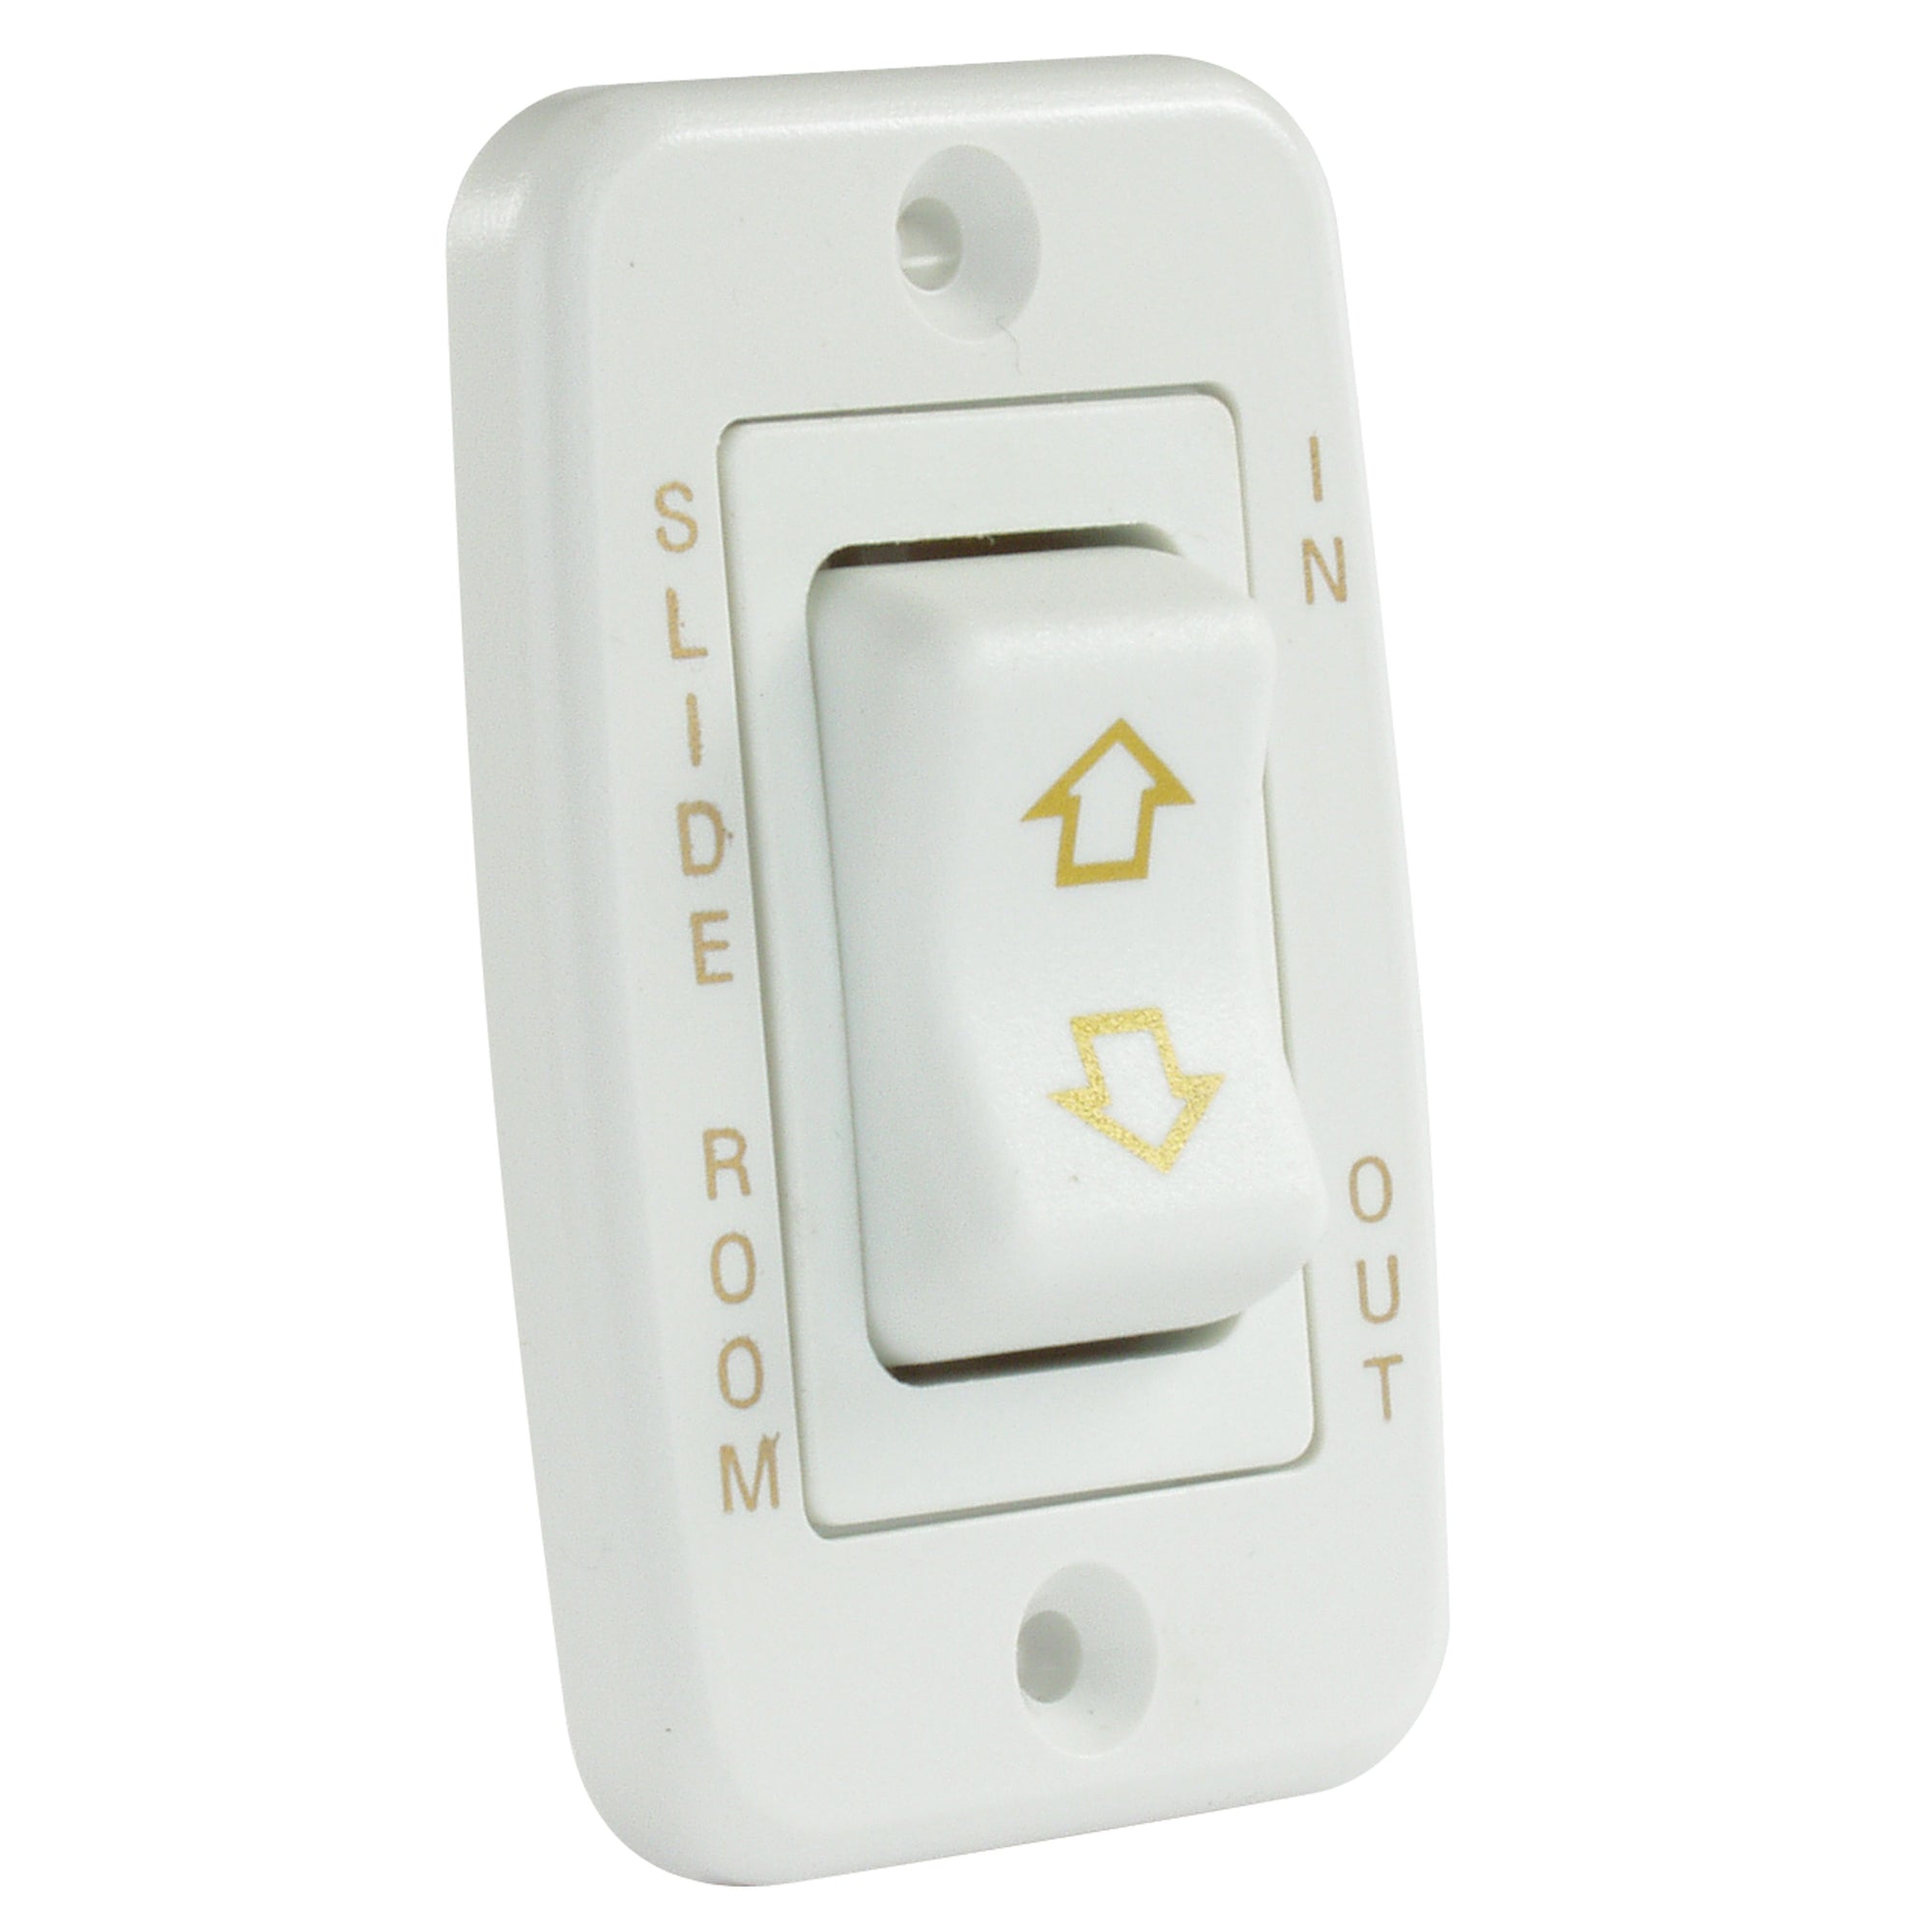 JR Products 12345 Low Profile Slide-Out Switch with Bezel - White